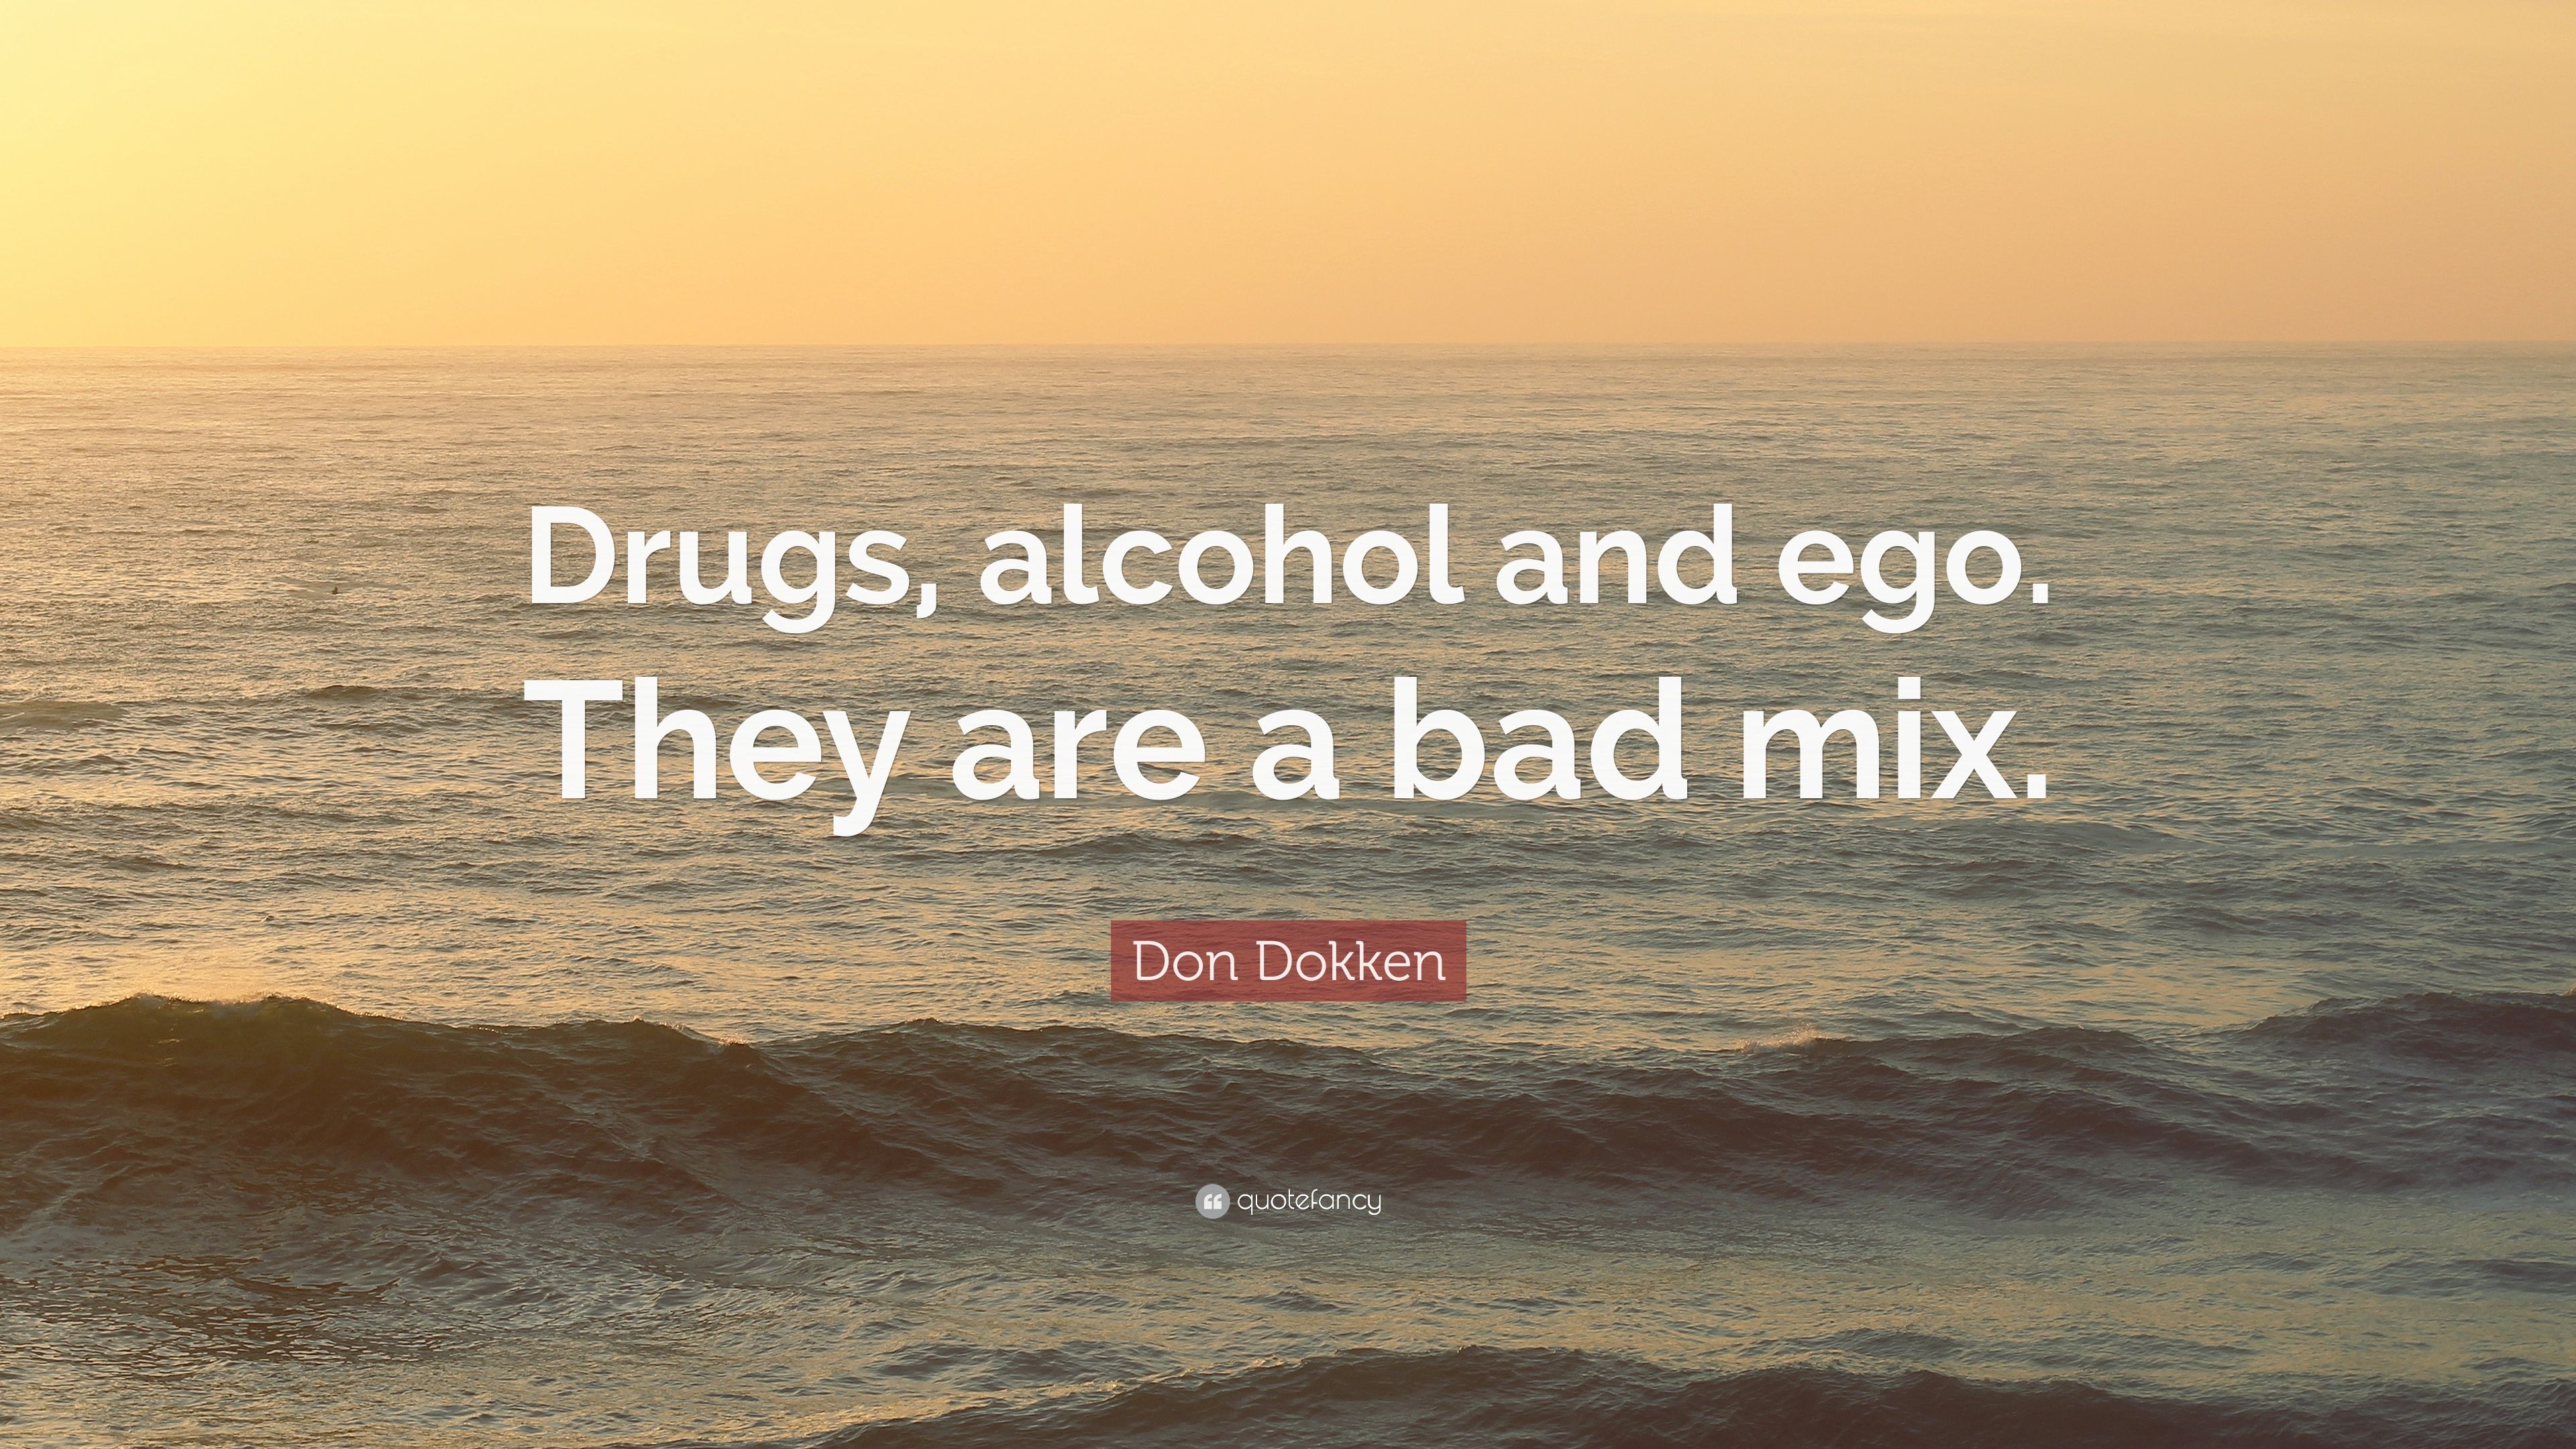 Don Dokken Quote: “Drugs, alcohol and ego. They are a bad mix